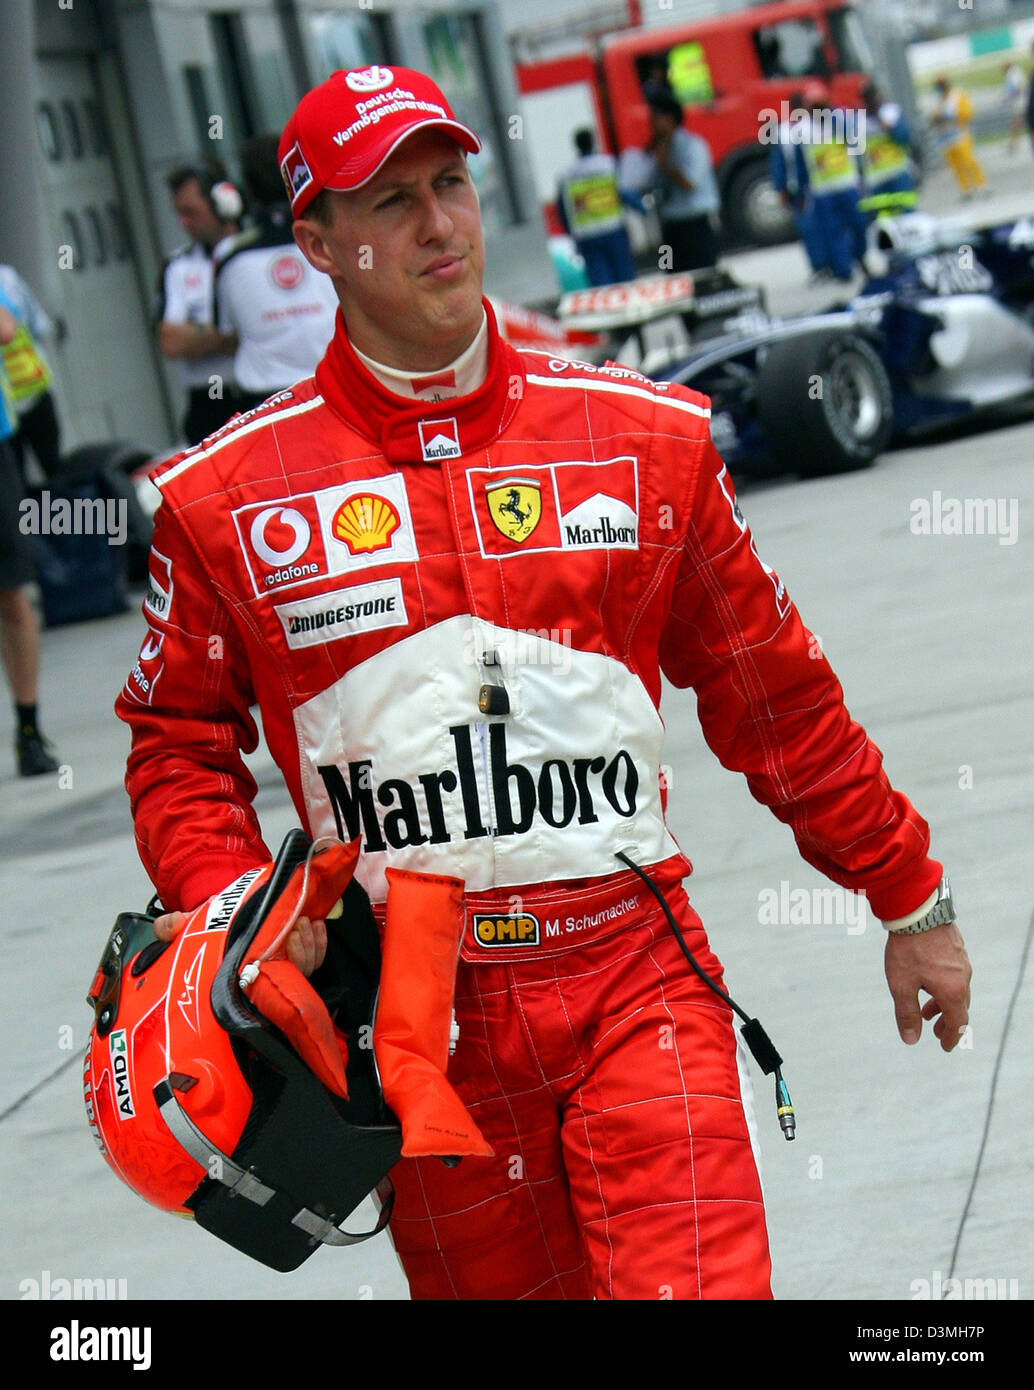 German Formula One driver Michael Schumacher of Ferrari's F1 team walks  through the paddock after the second practice session at the F1 racetrack  in Sepang near Kuala Lumpur, Malaysia, Friday 17 March